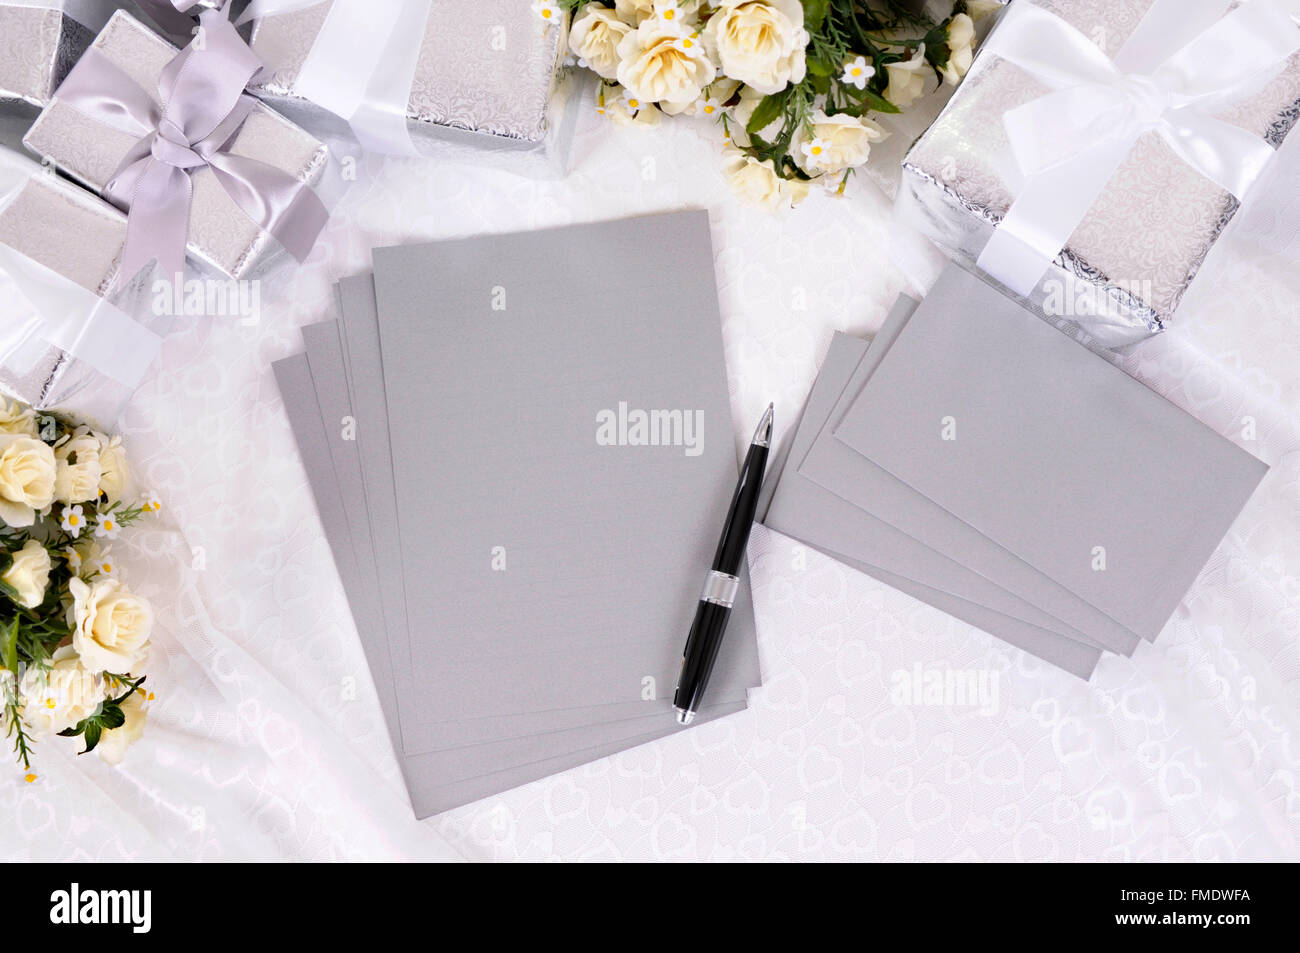 Silver gray writing paper or invitations with envelopes laid on bridal lace with several wedding gifts and white rose bouquets. Stock Photo